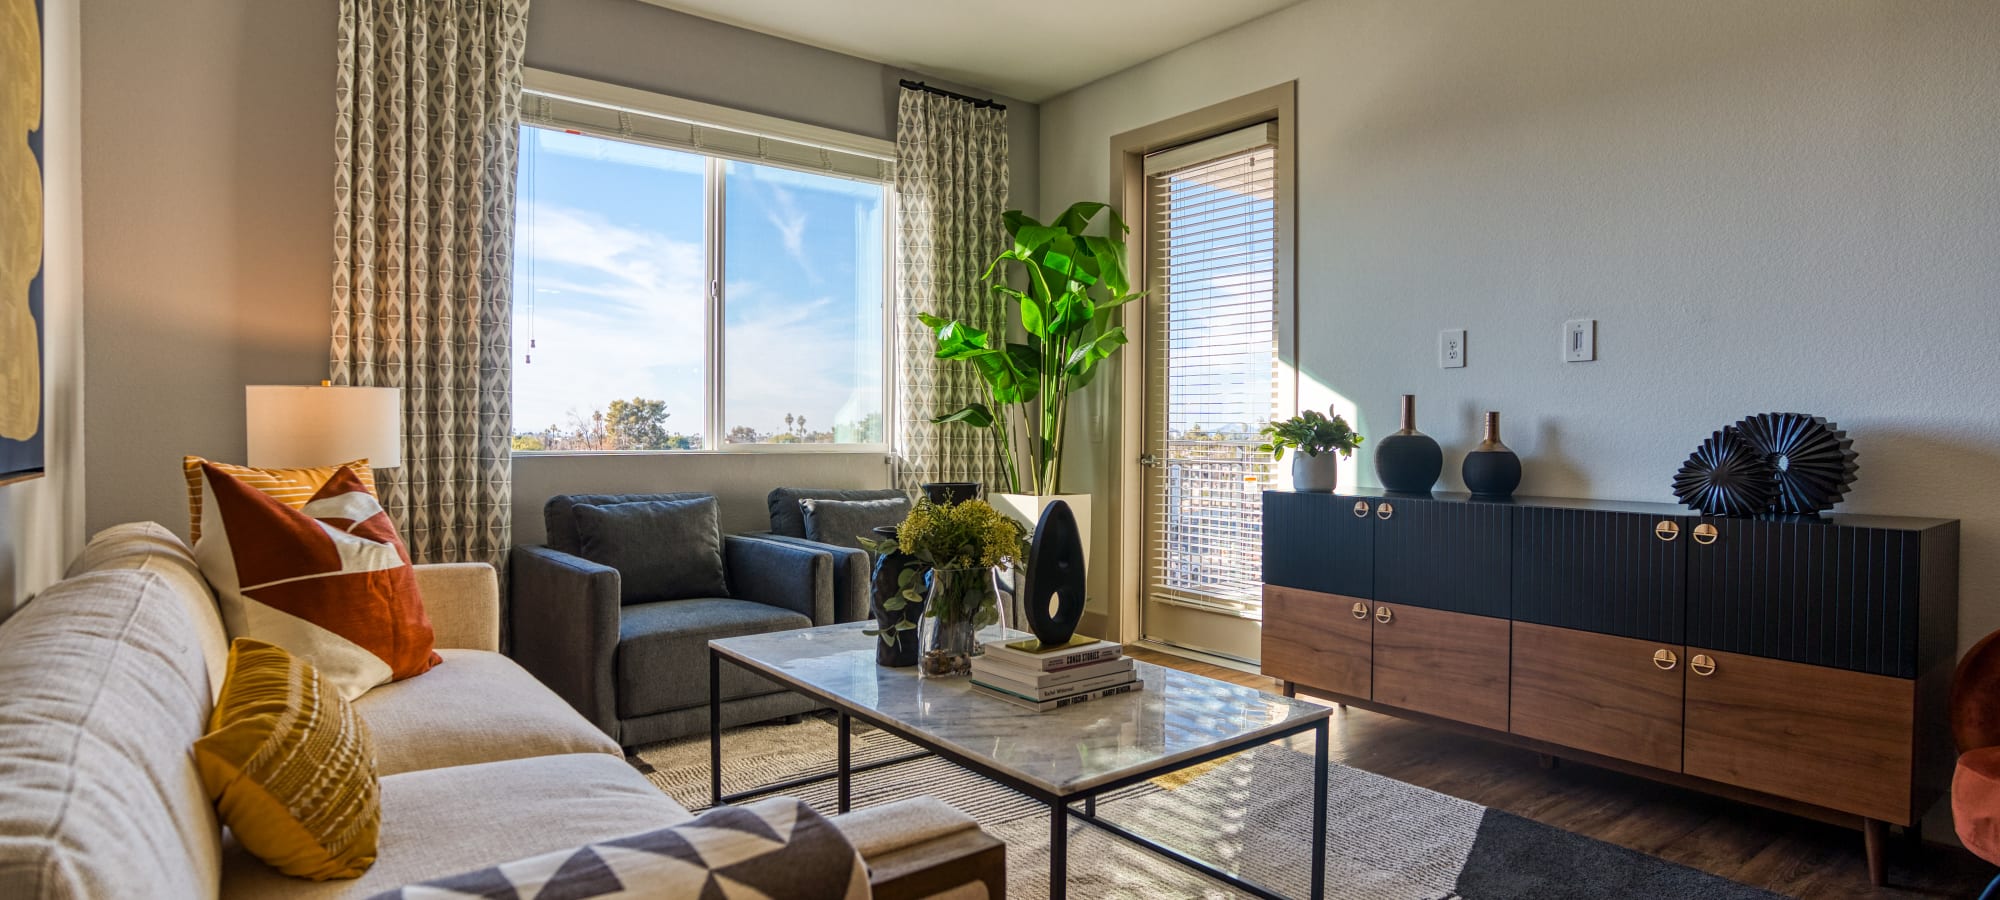 Expansive living space at Alexan Tempe in Tempe, Arizona